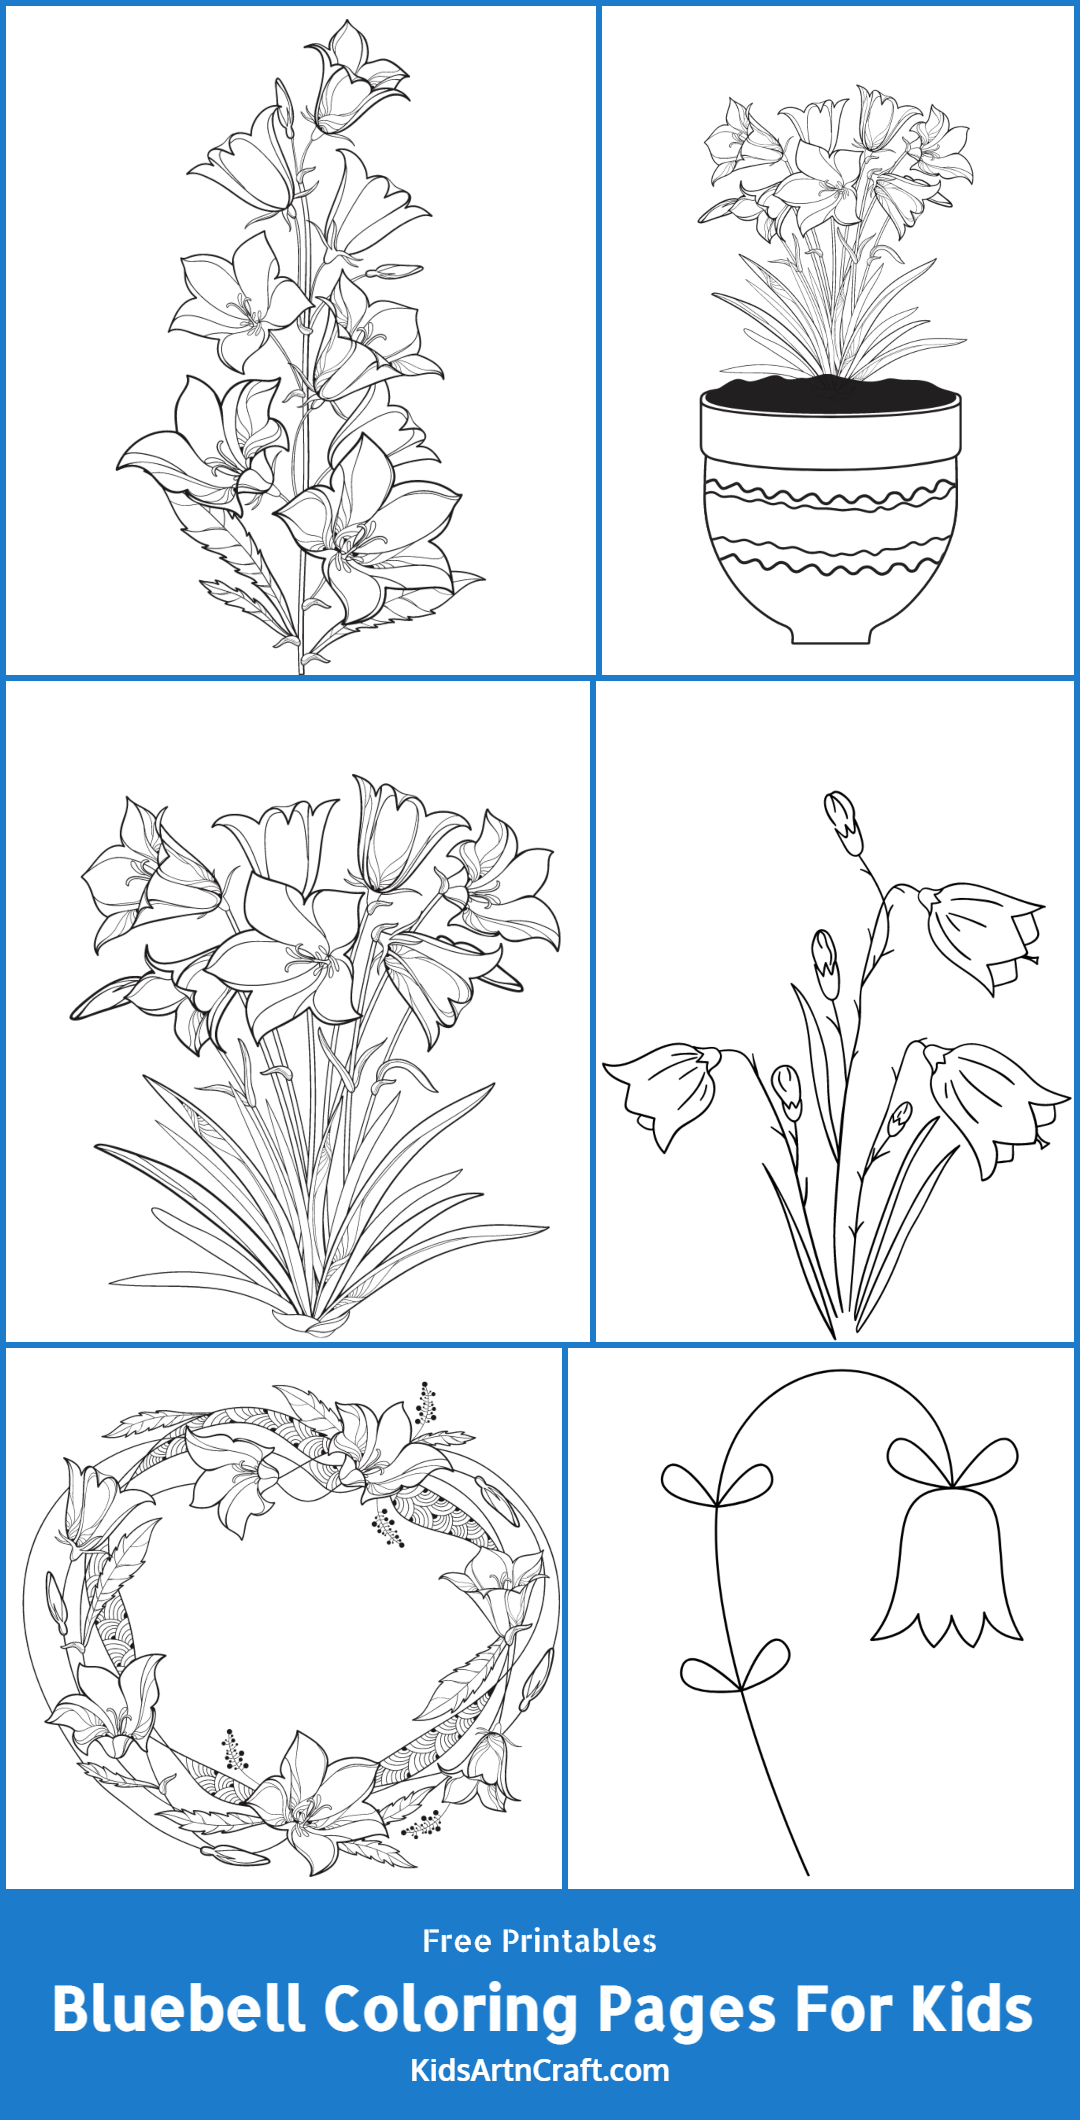 Bluebell Coloring Pages For Kids – Free Printables